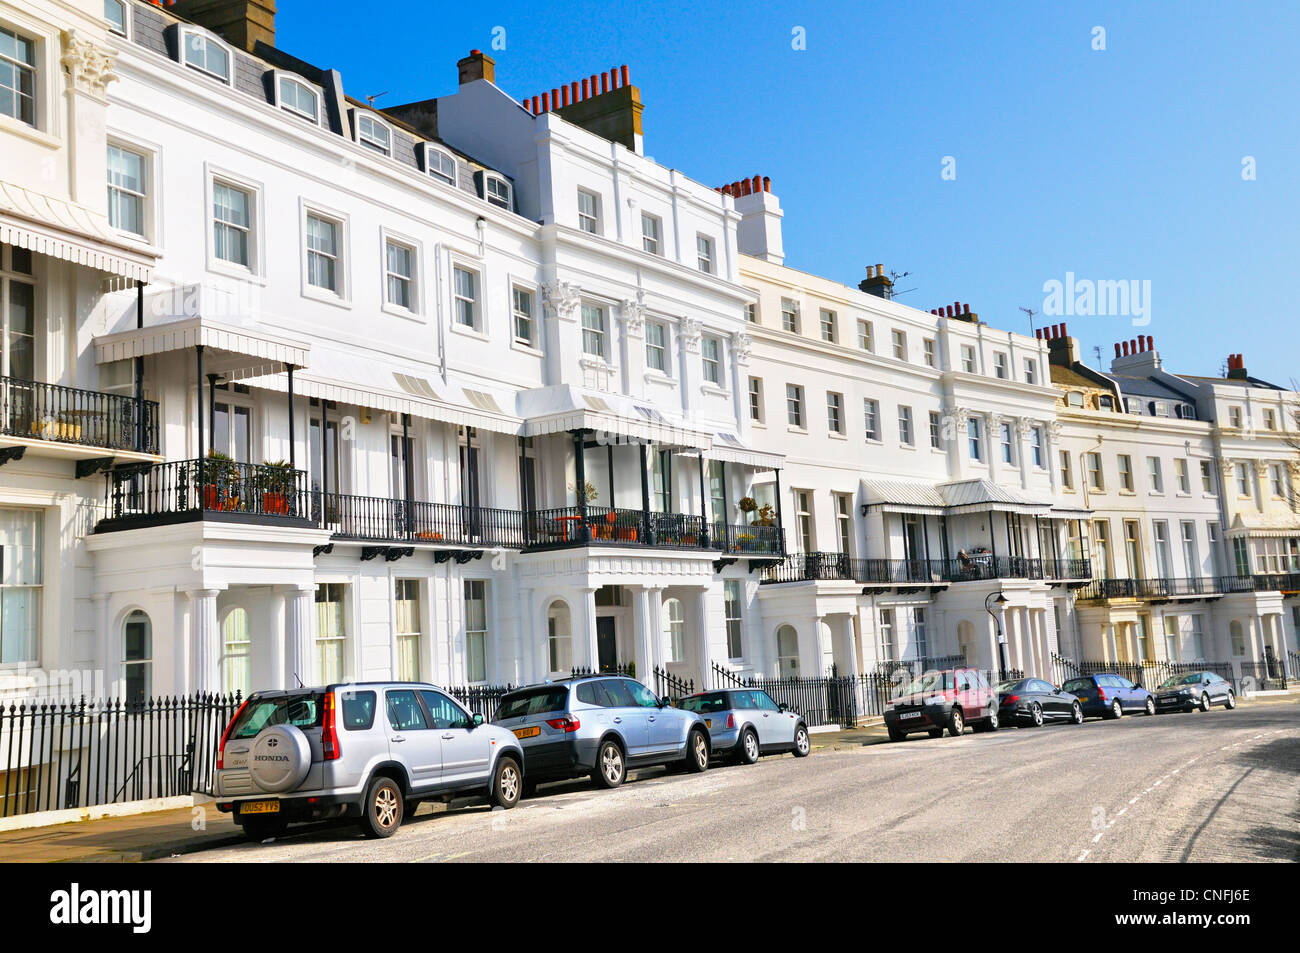 Lewes Crescent, Kemp Town, Brighton, East Sussex, UK Stock Photo